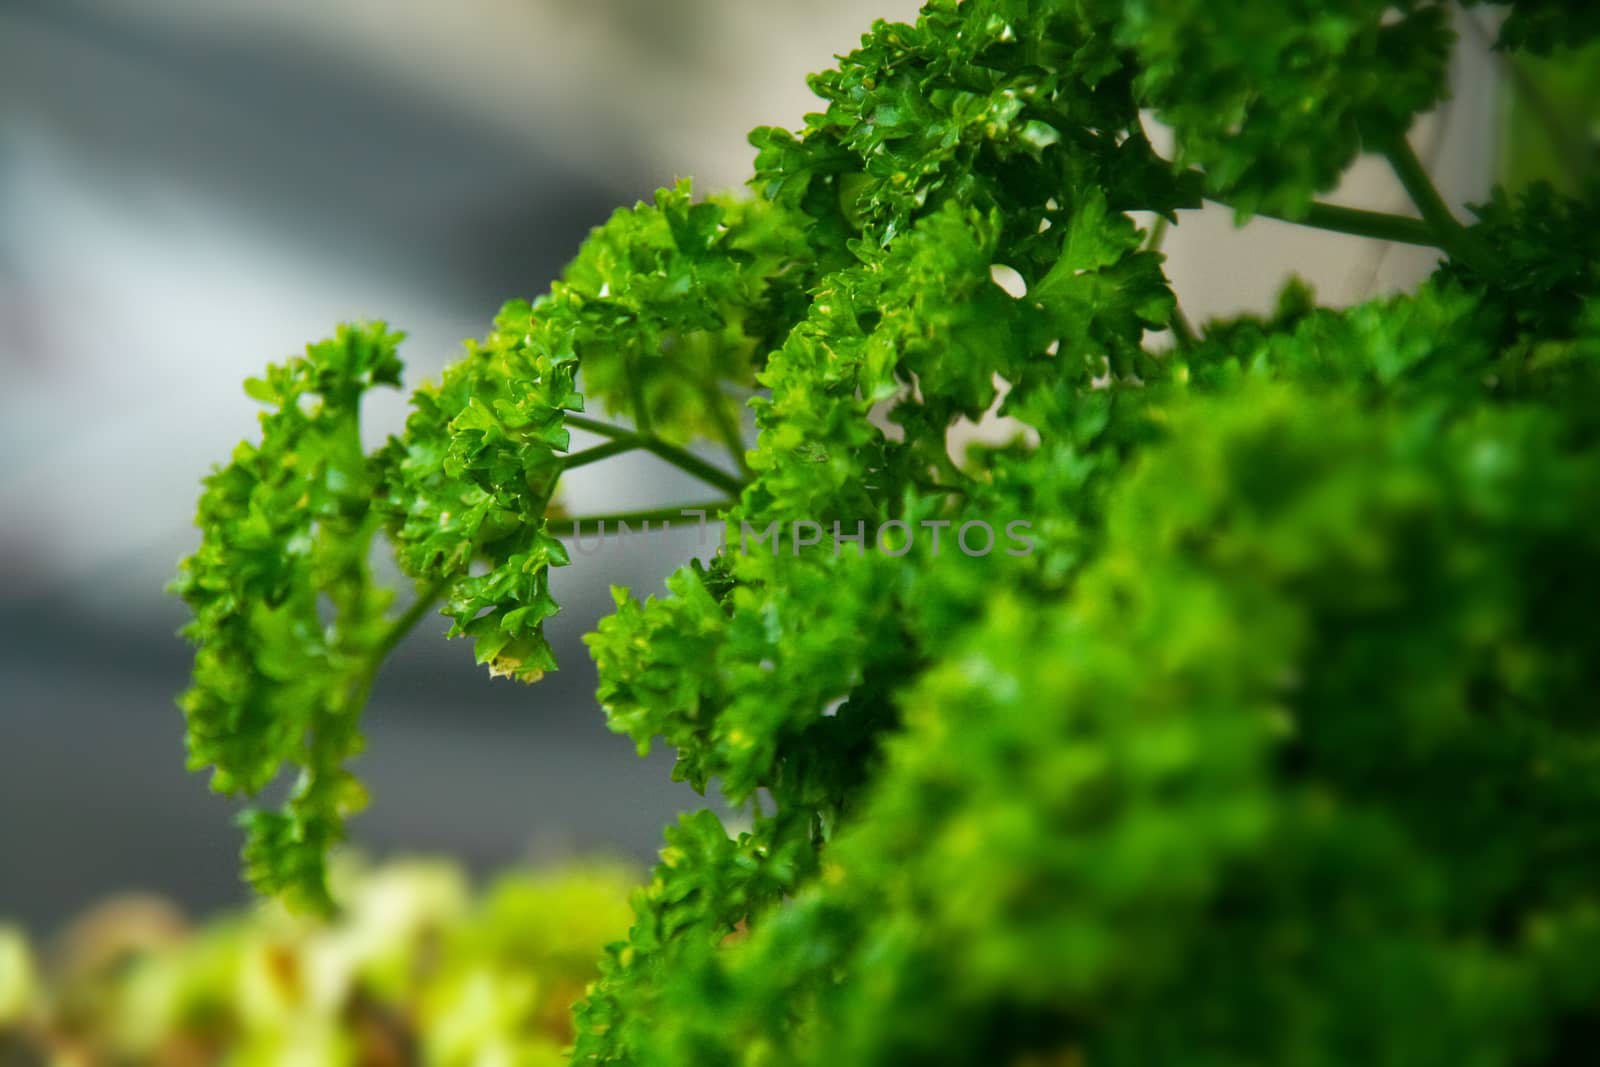 a close up shot of a fresh green parsely plant or herb